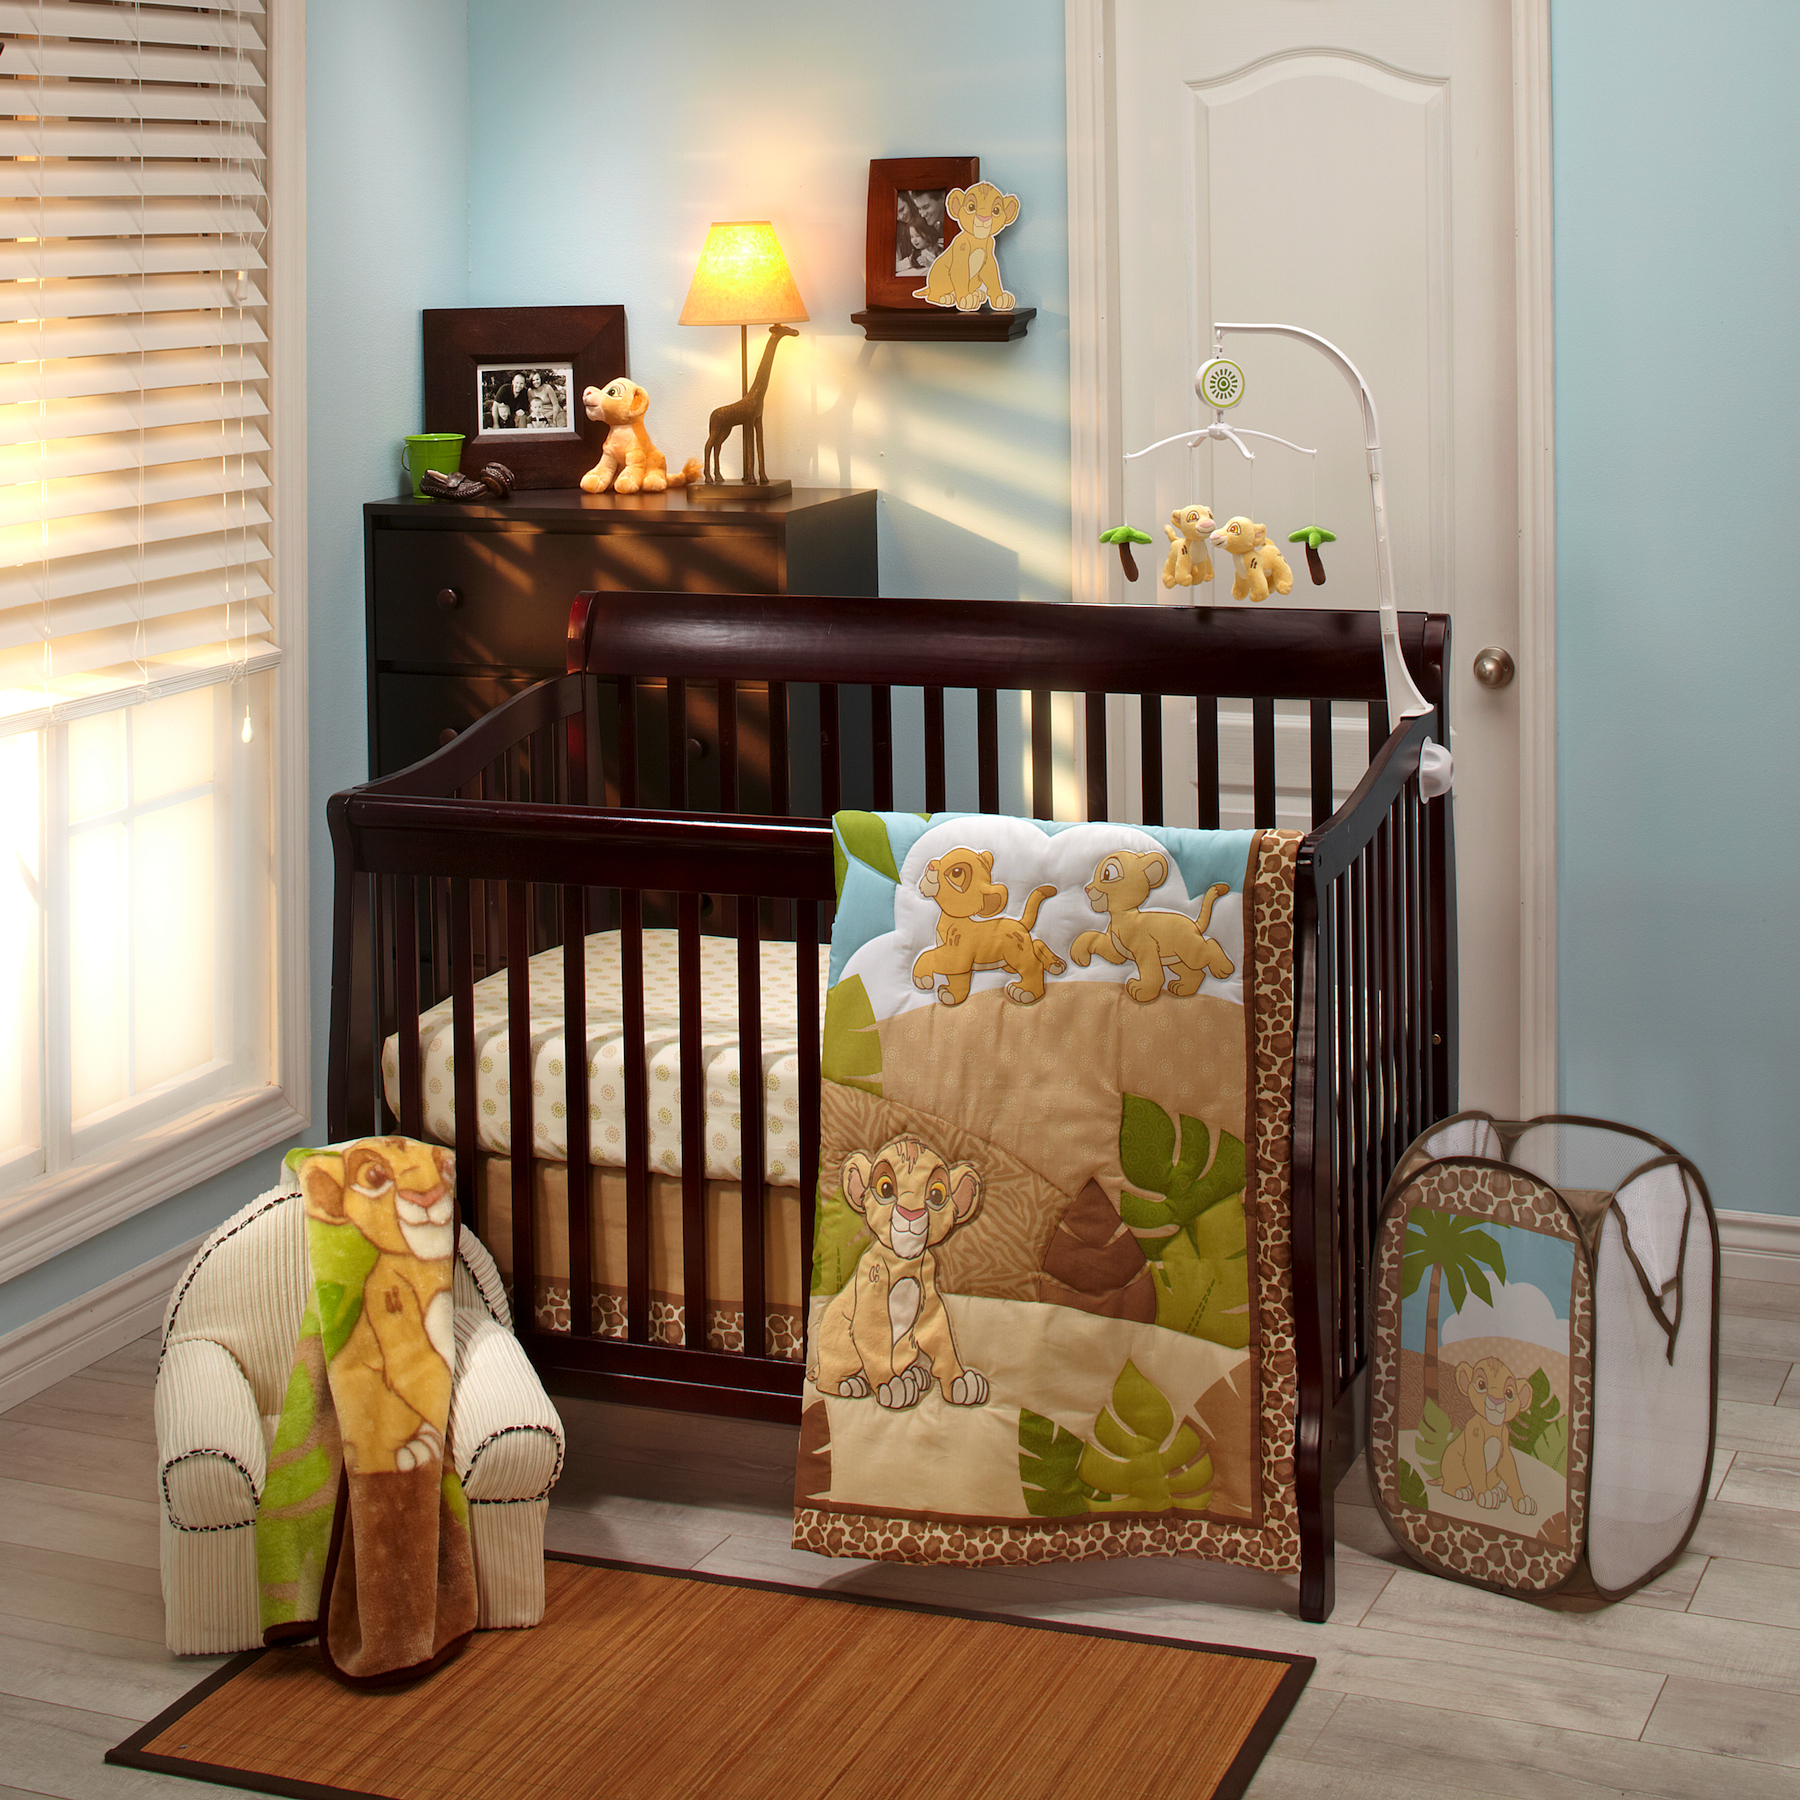 Lion King Nursery Legendary Lion King Themed Baby Nursery For Boy Furnished With Dark Brown Wooden Mini Crib Bedding Interior Design Astonishing Mini Crib Bedding Designed In Minimalist Model For Mansion